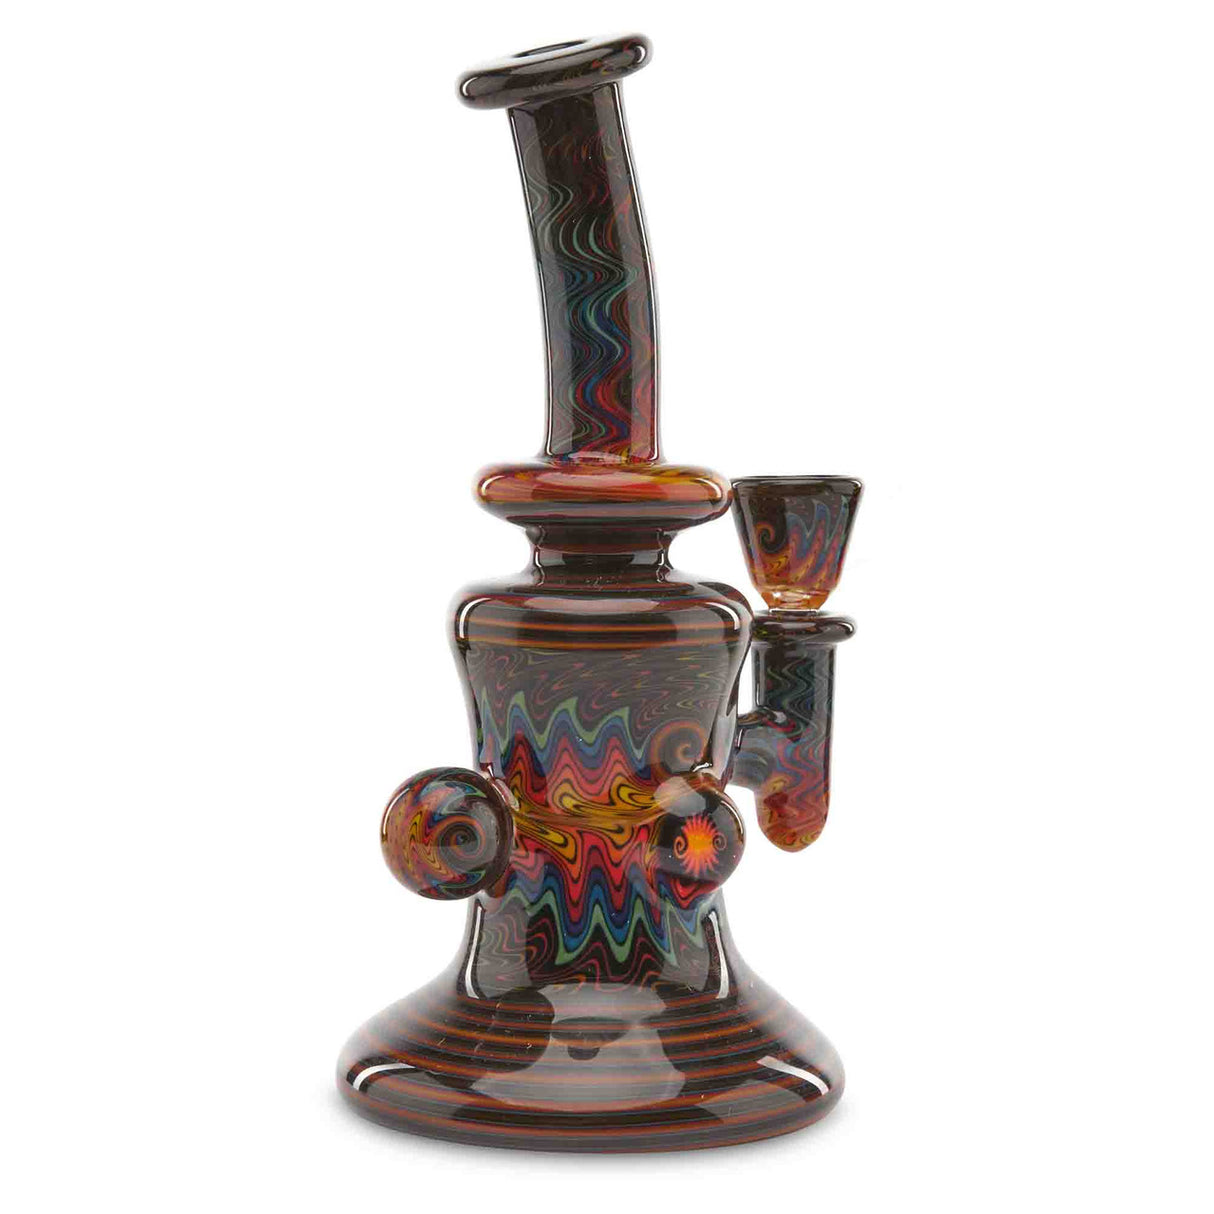 Andy G Banger Hanger #3 heady glass water pipe Heady Dab Rig